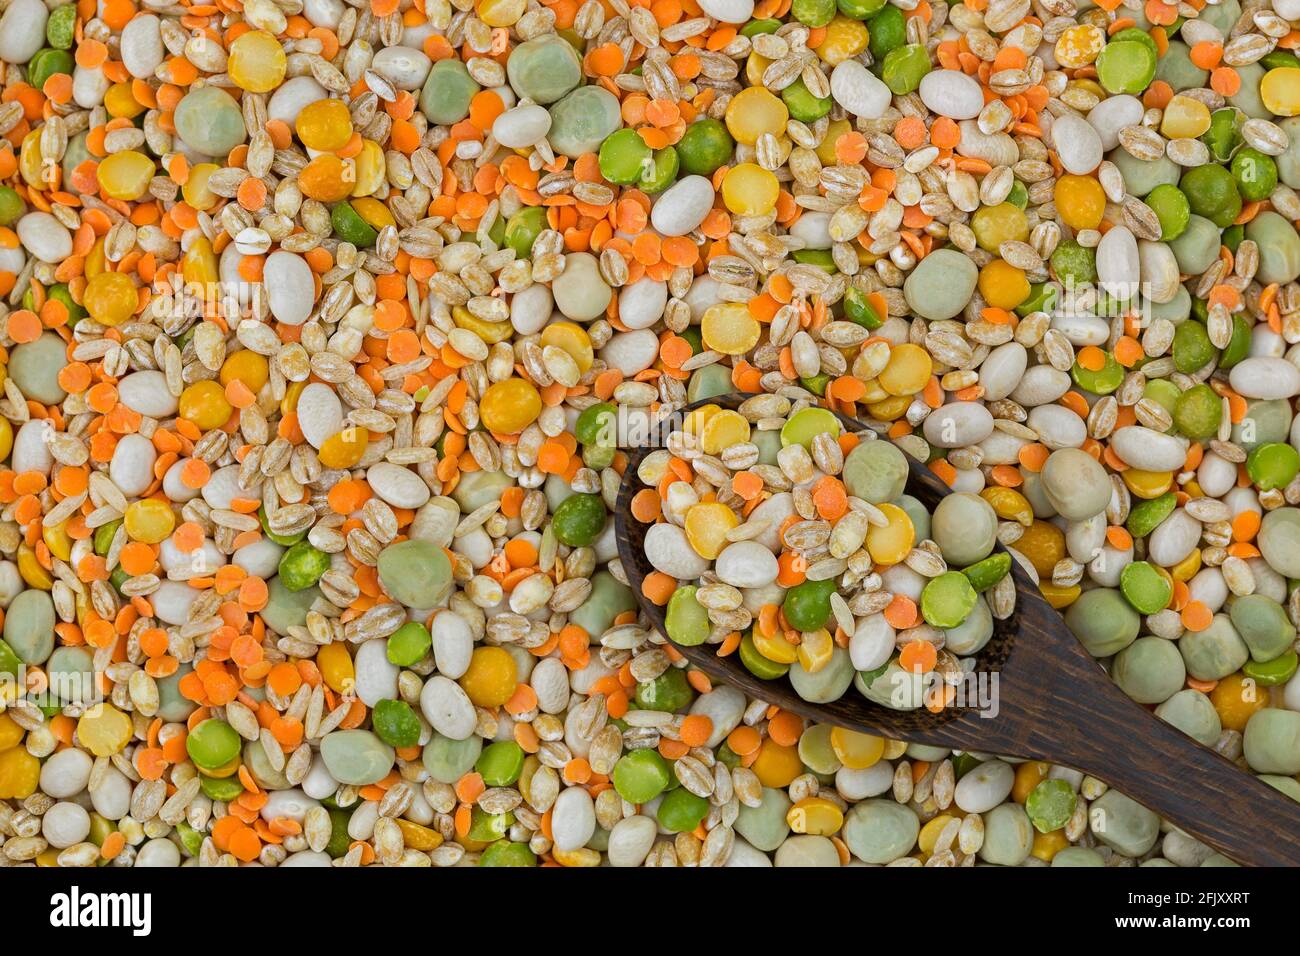 Mix of pearl barley, haricot beans, yellow green split peas, red split lentils, marrowfat peas, brown rice. Soup stew mix with pulses, grains. Rich in Stock Photo